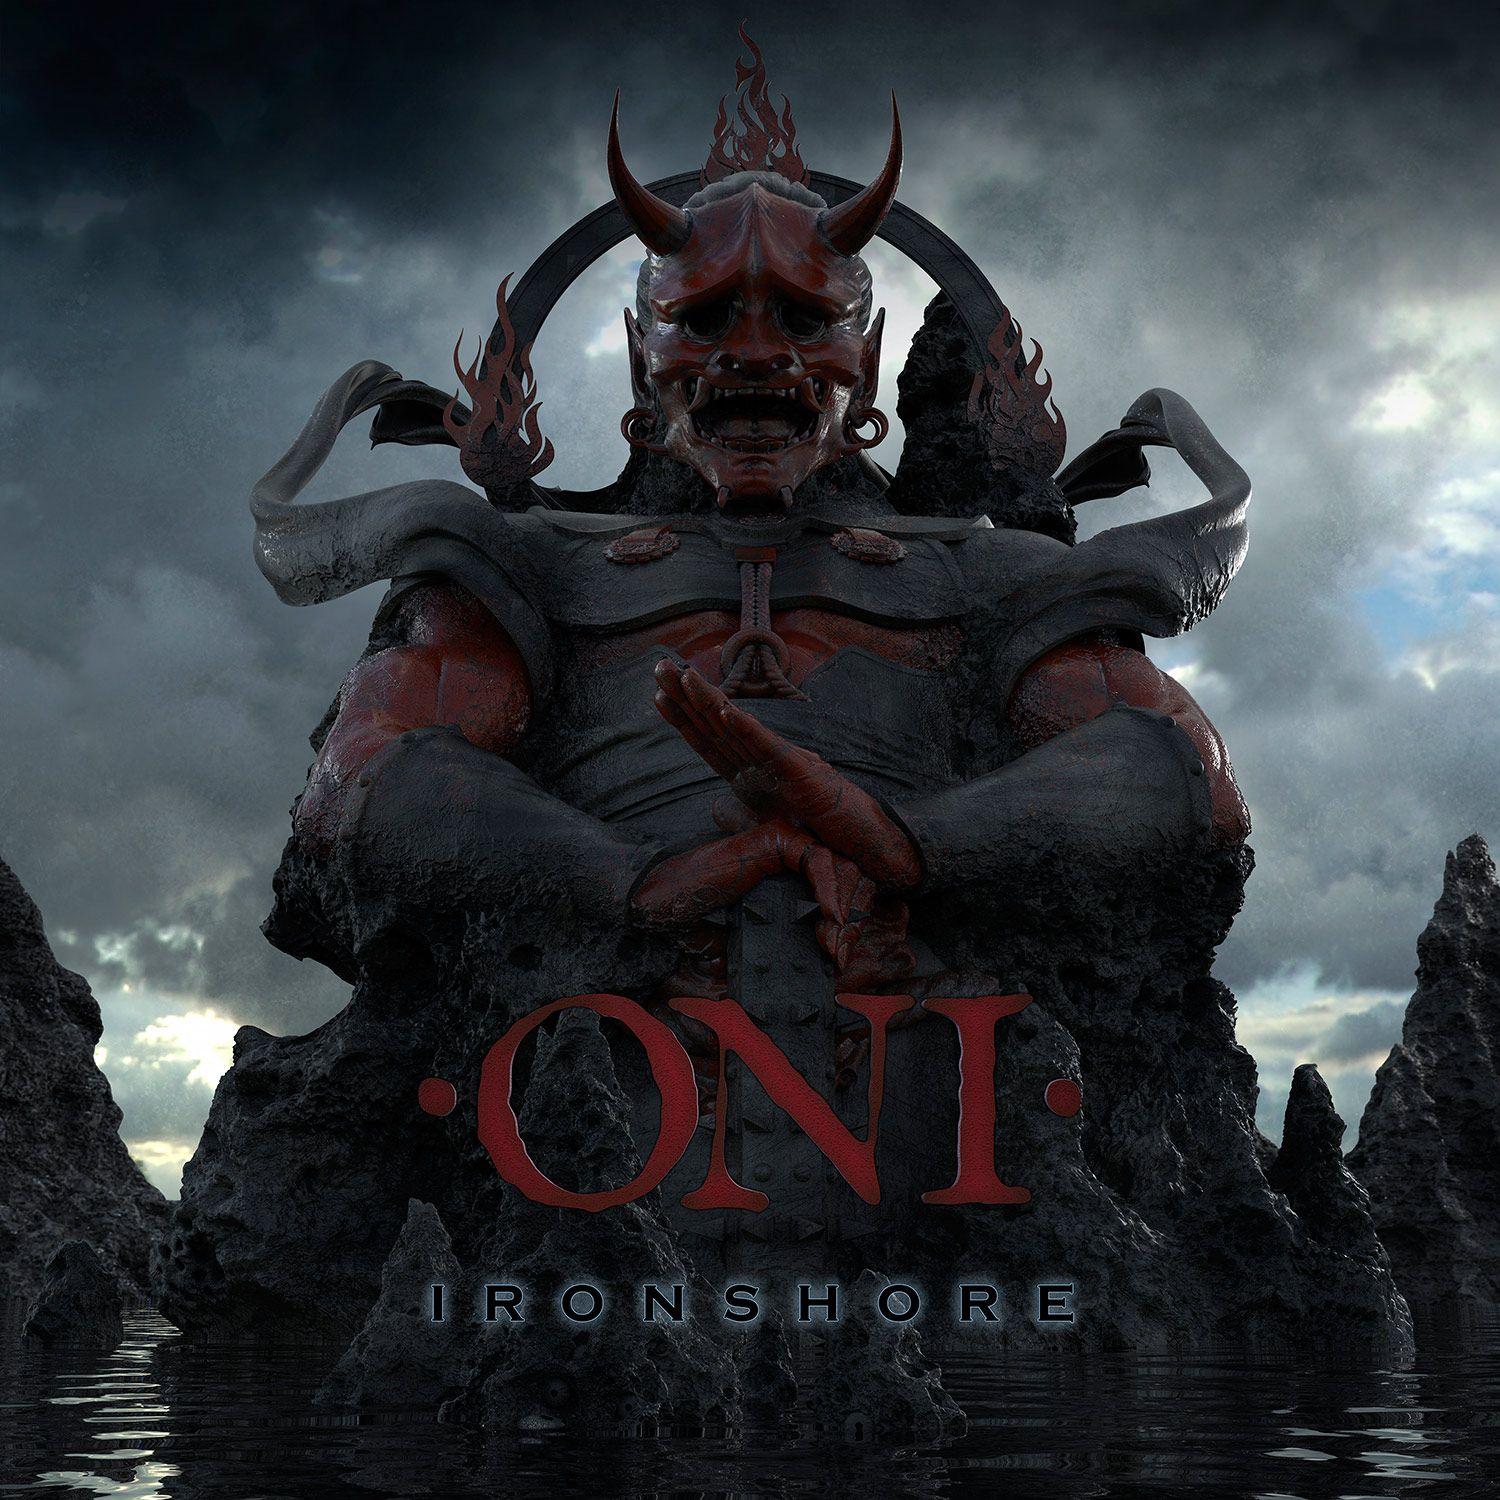 Oni Demon Wallpapers Top Free Oni Demon Backgrounds Wallpaperaccess